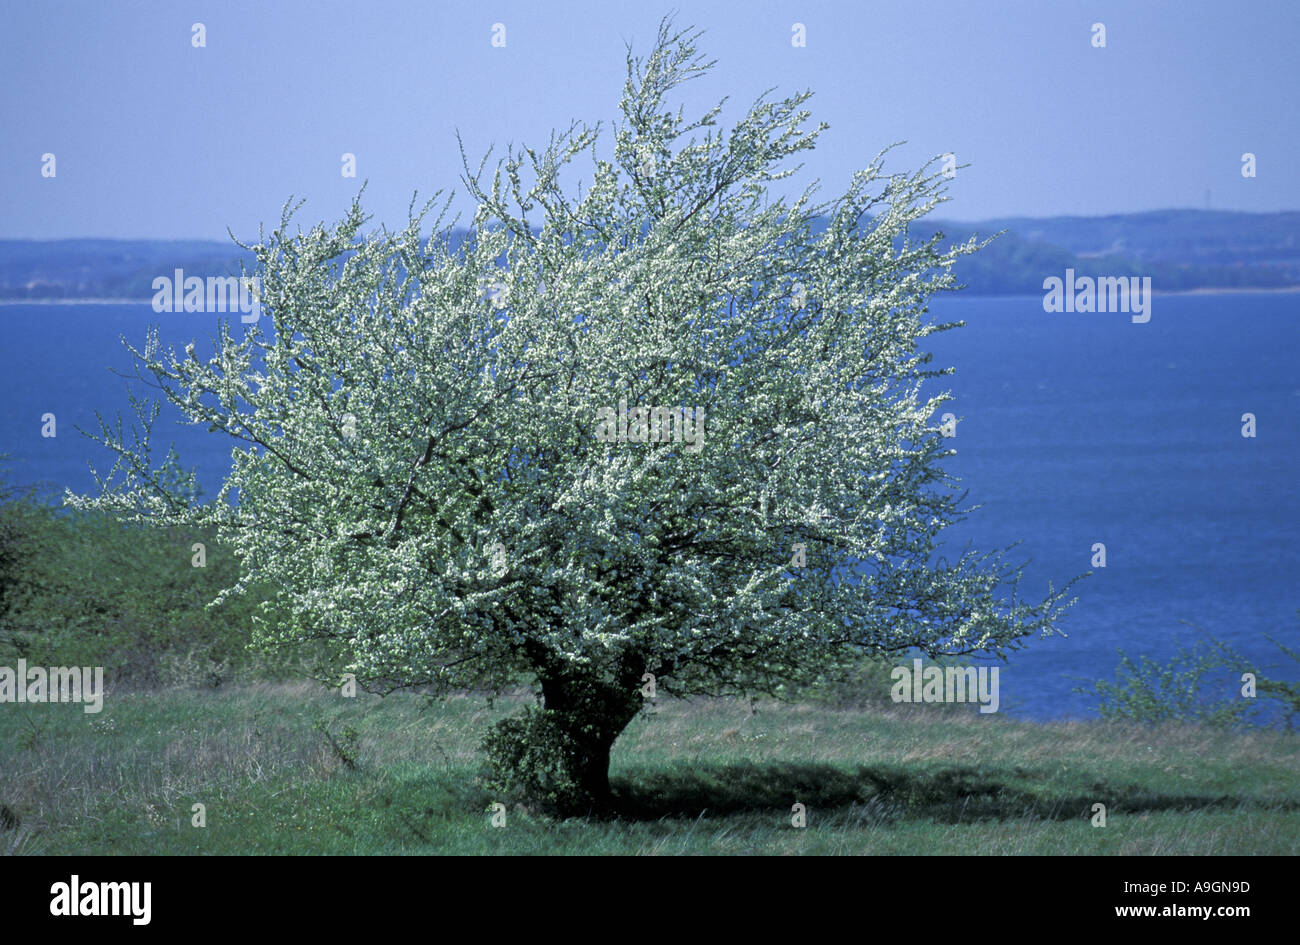 Cockspur Hawthorn High Resolution Stock Photography and Images - Alamy